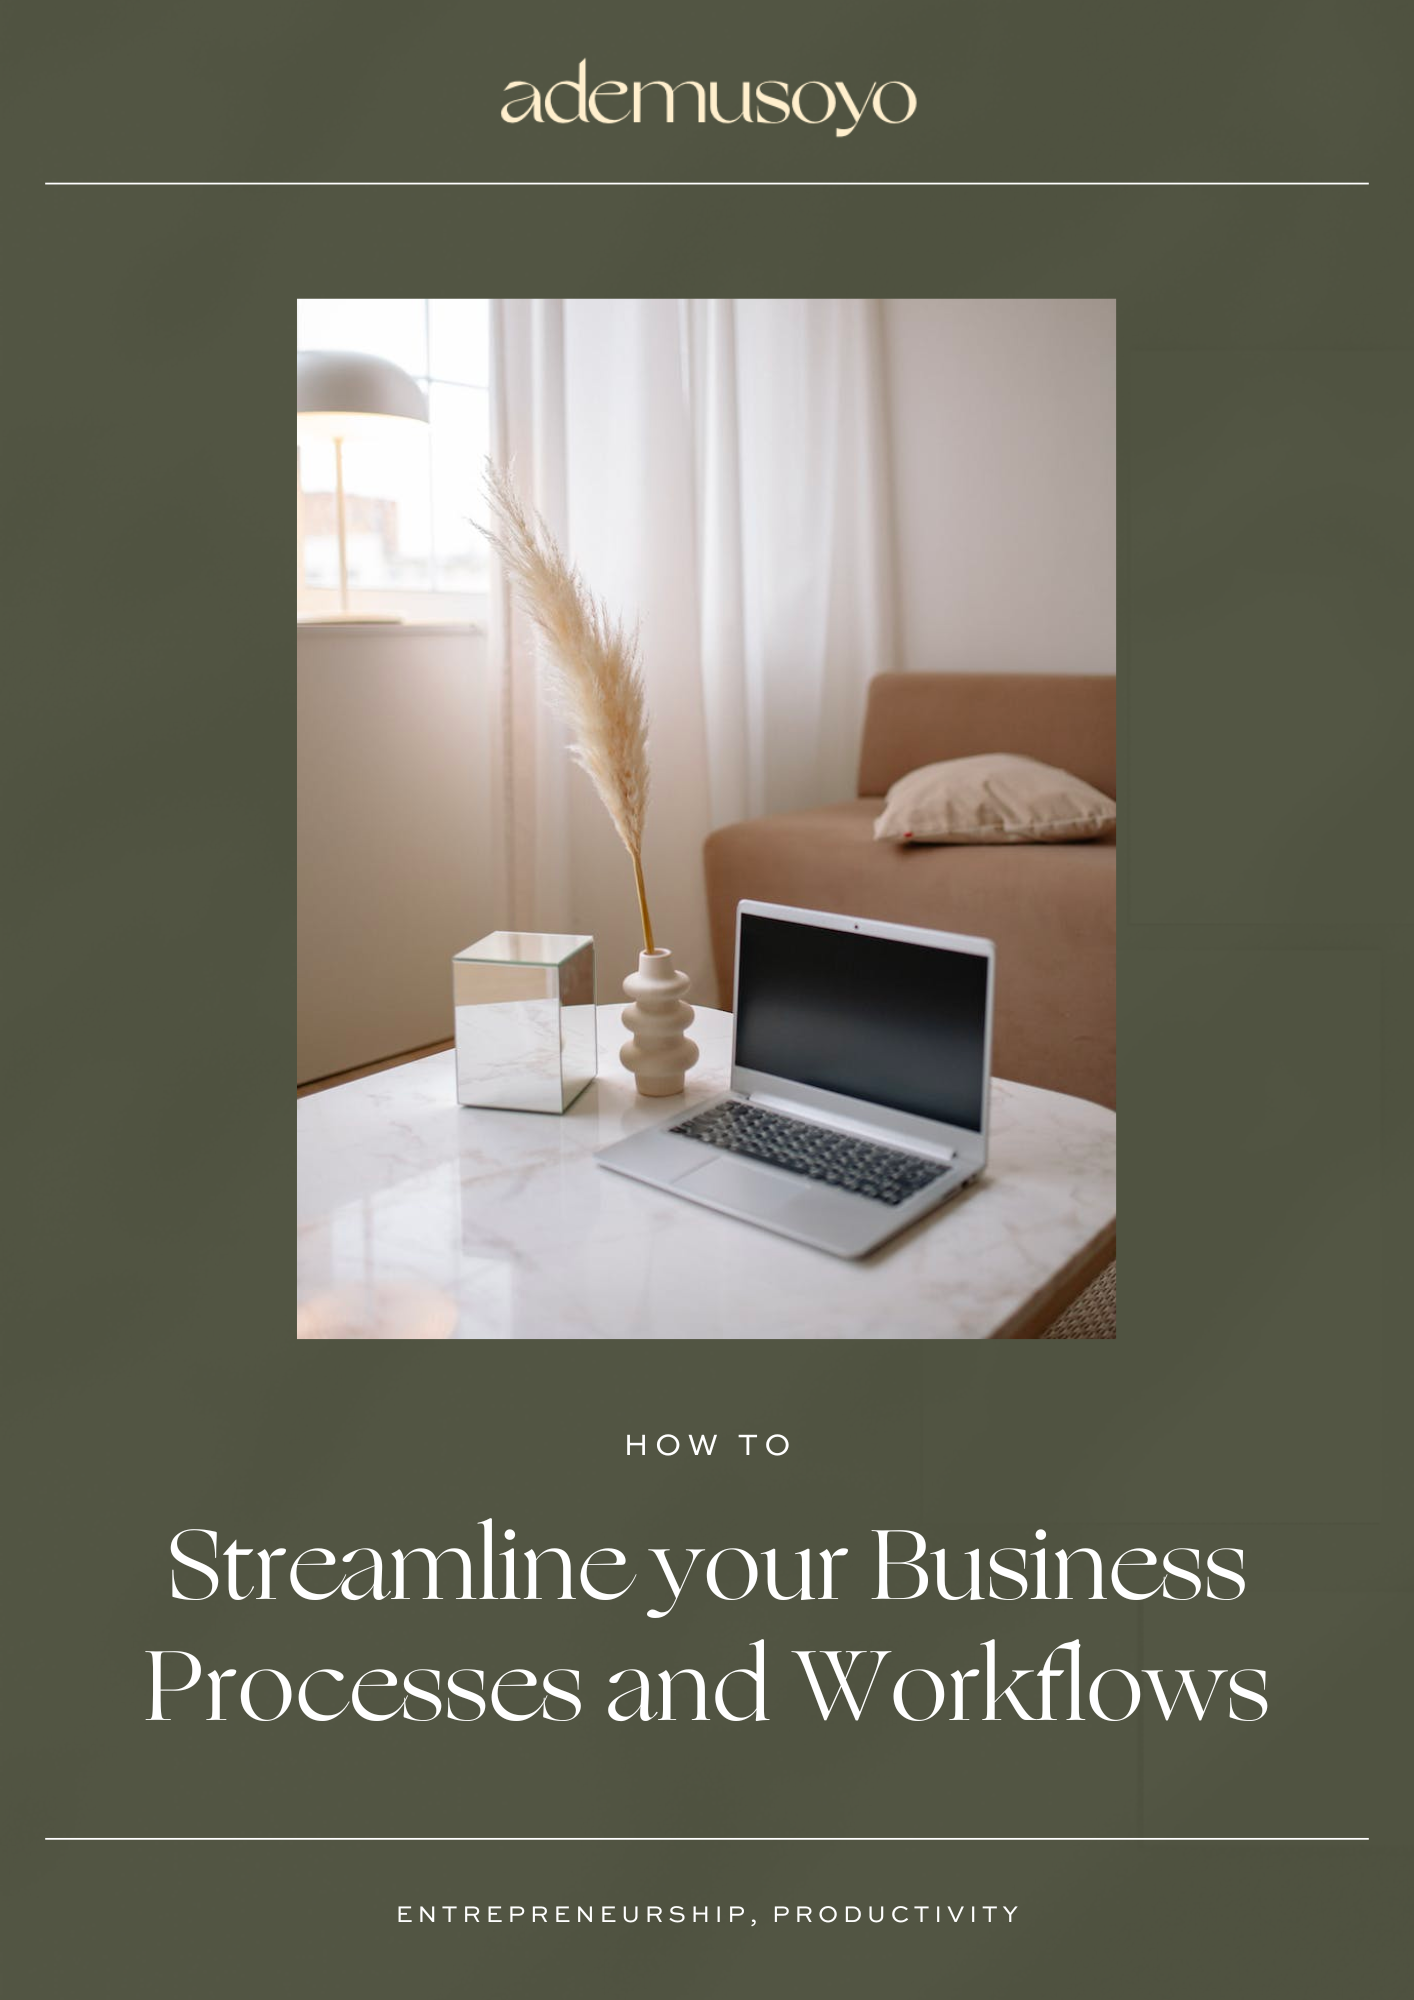 How to Streamline your Business Processes and Workflows